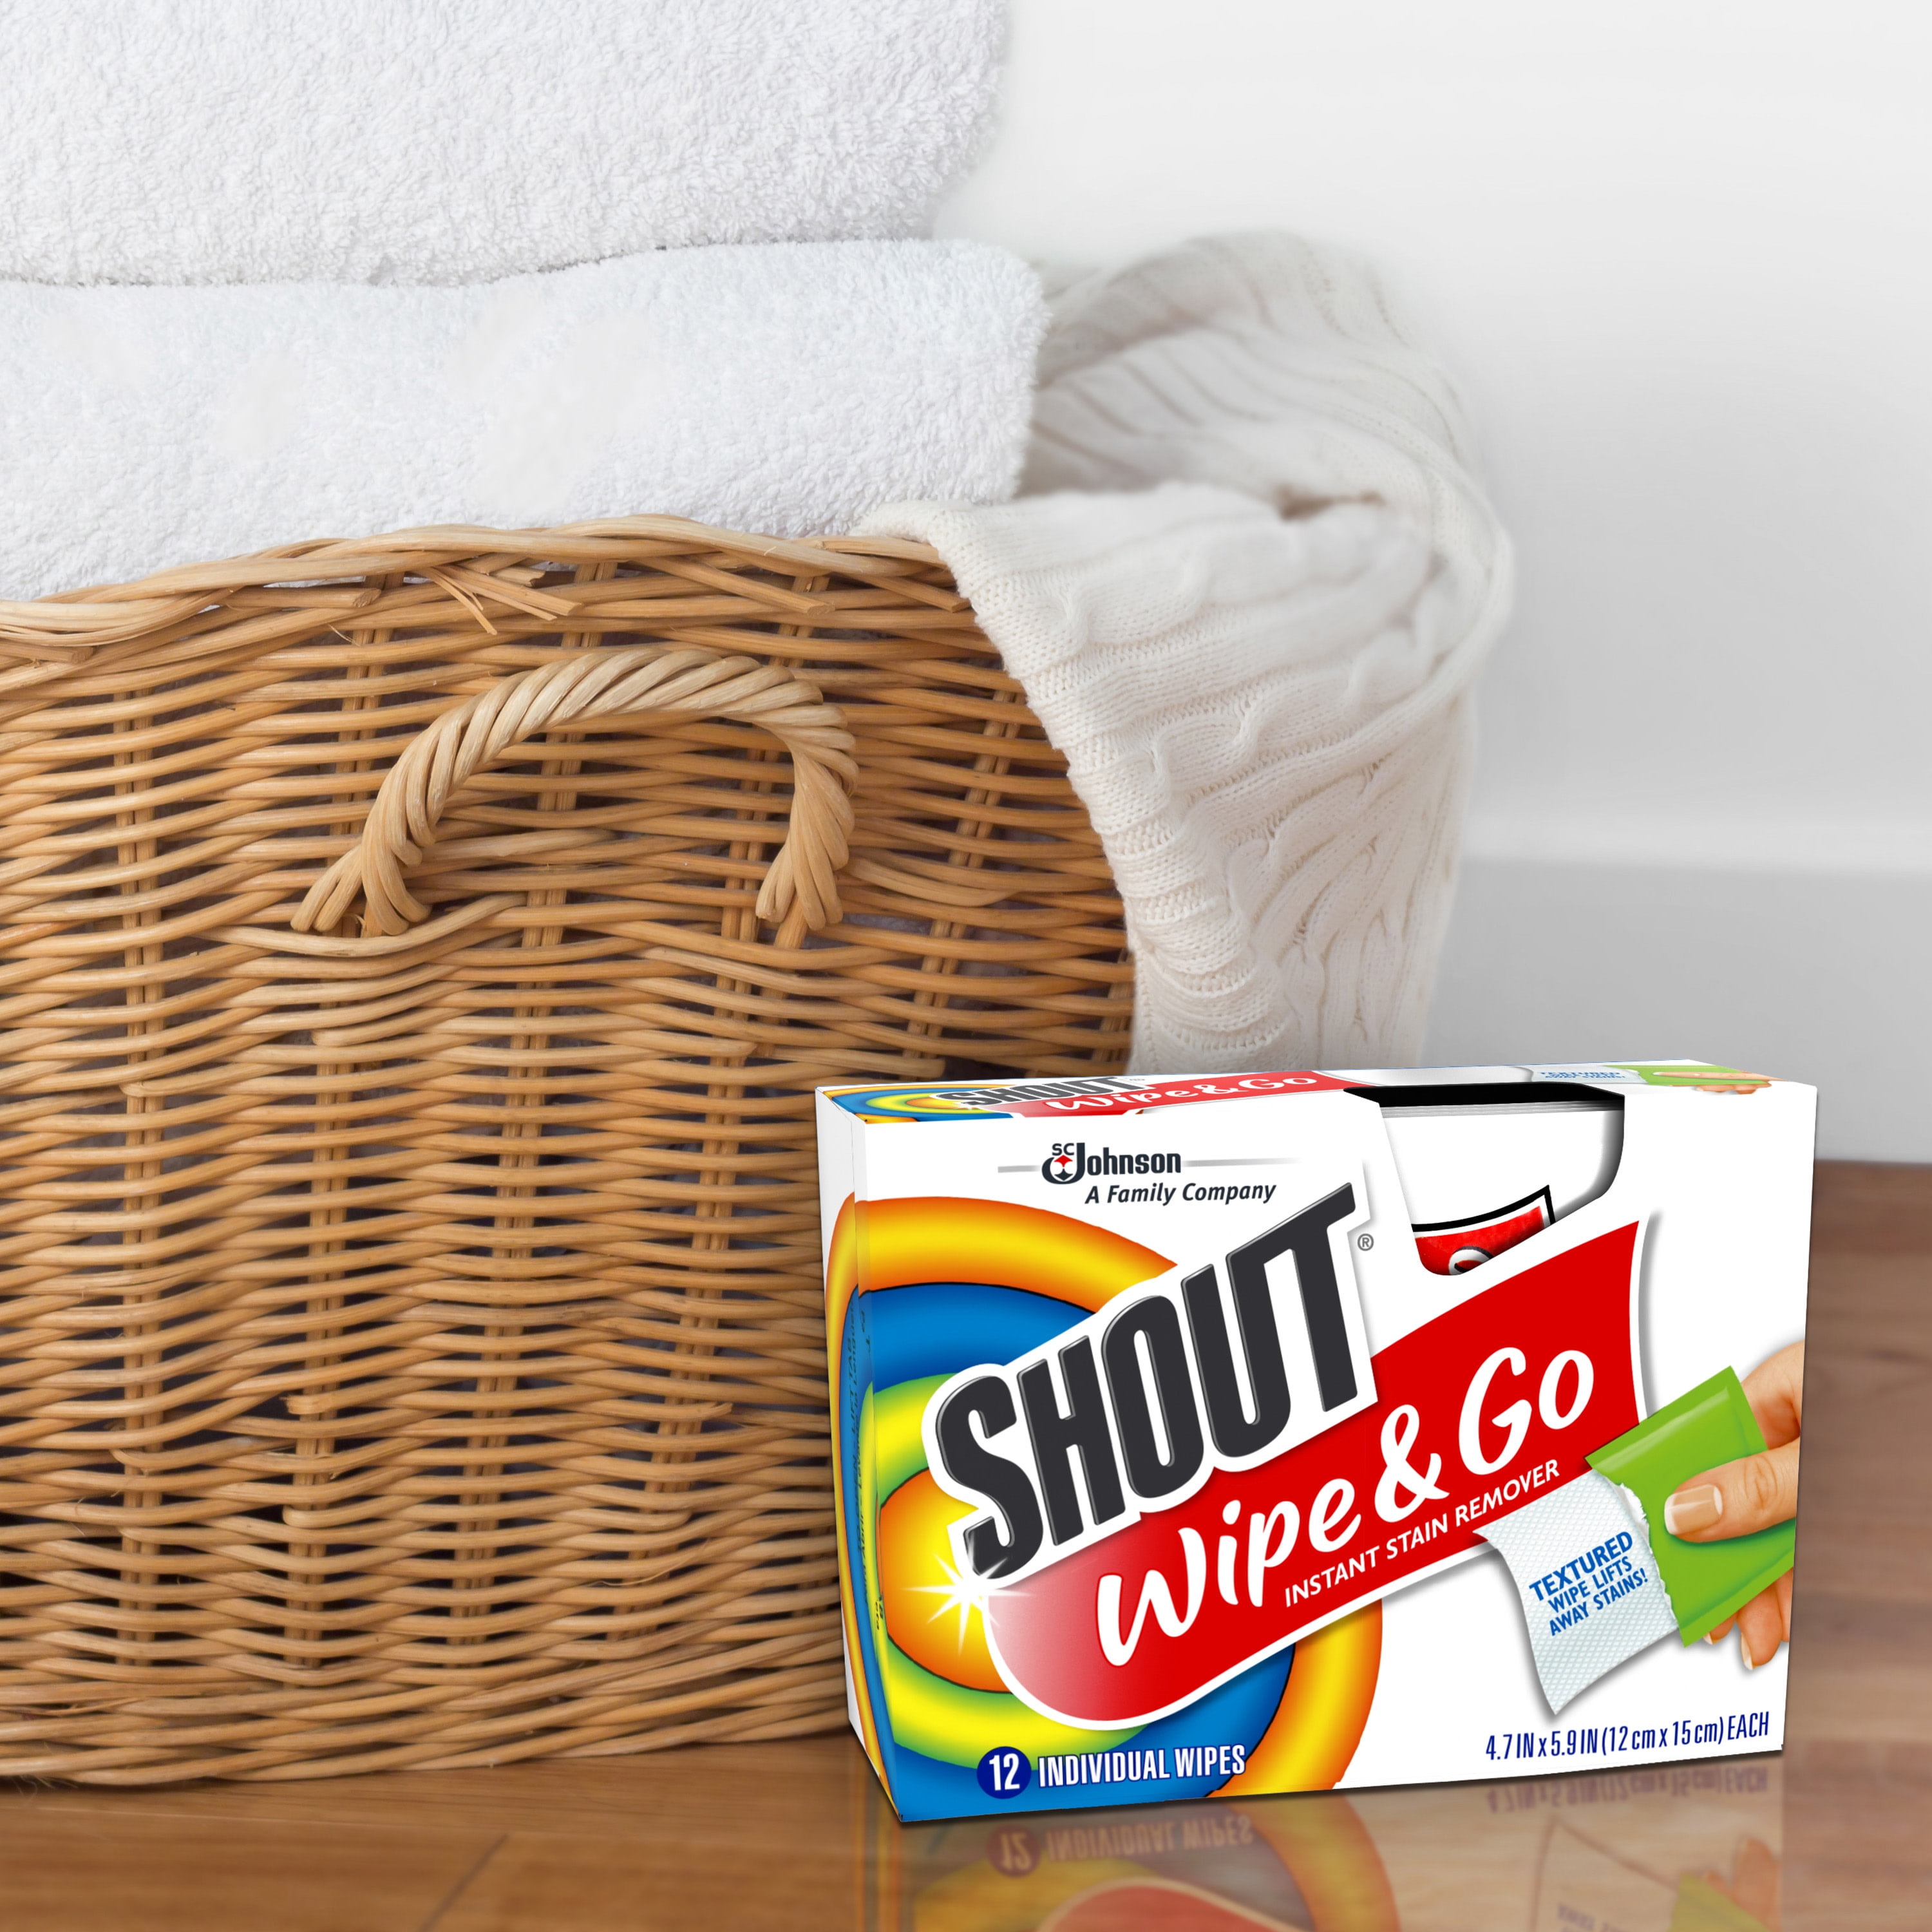 Shout Wipe & Go, Instant Stain Remover, 12 Wipes 